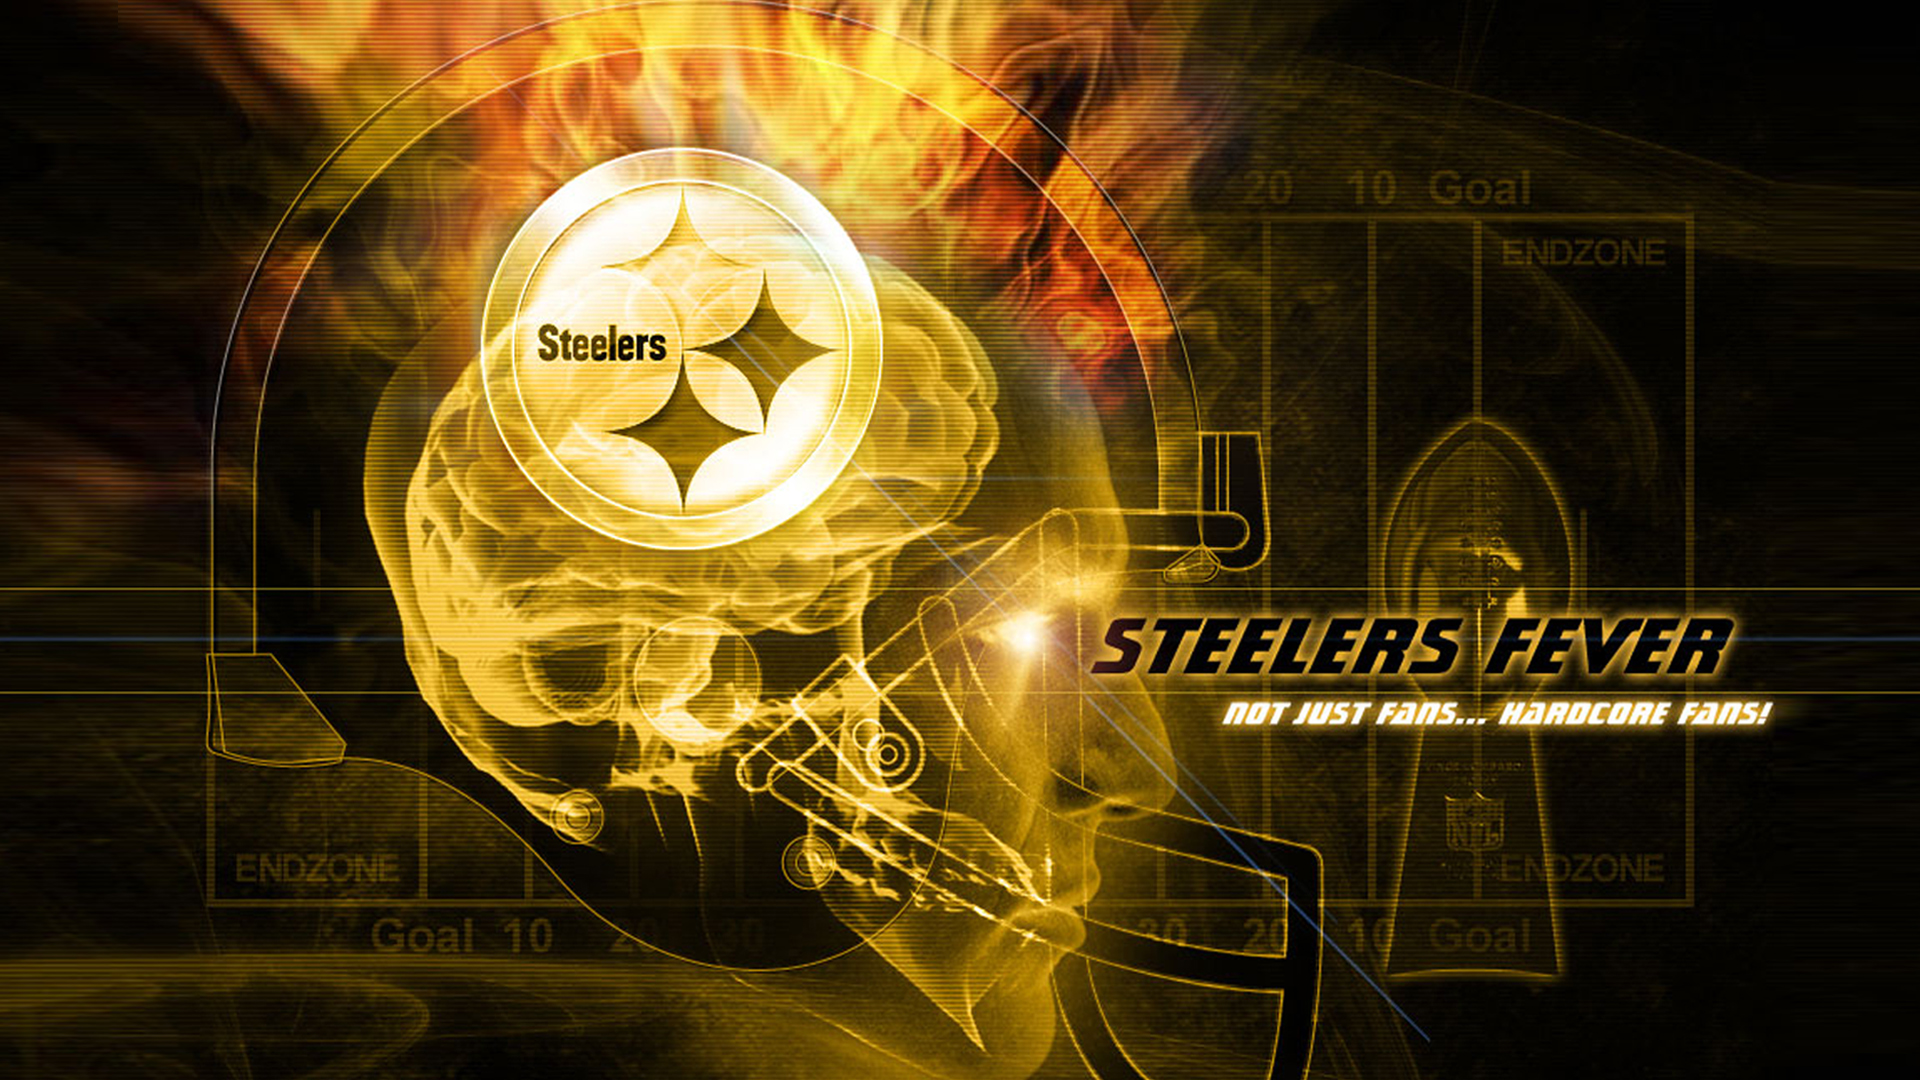 pittsburgh steelers wallpaper free,text,light,font,graphic design,design